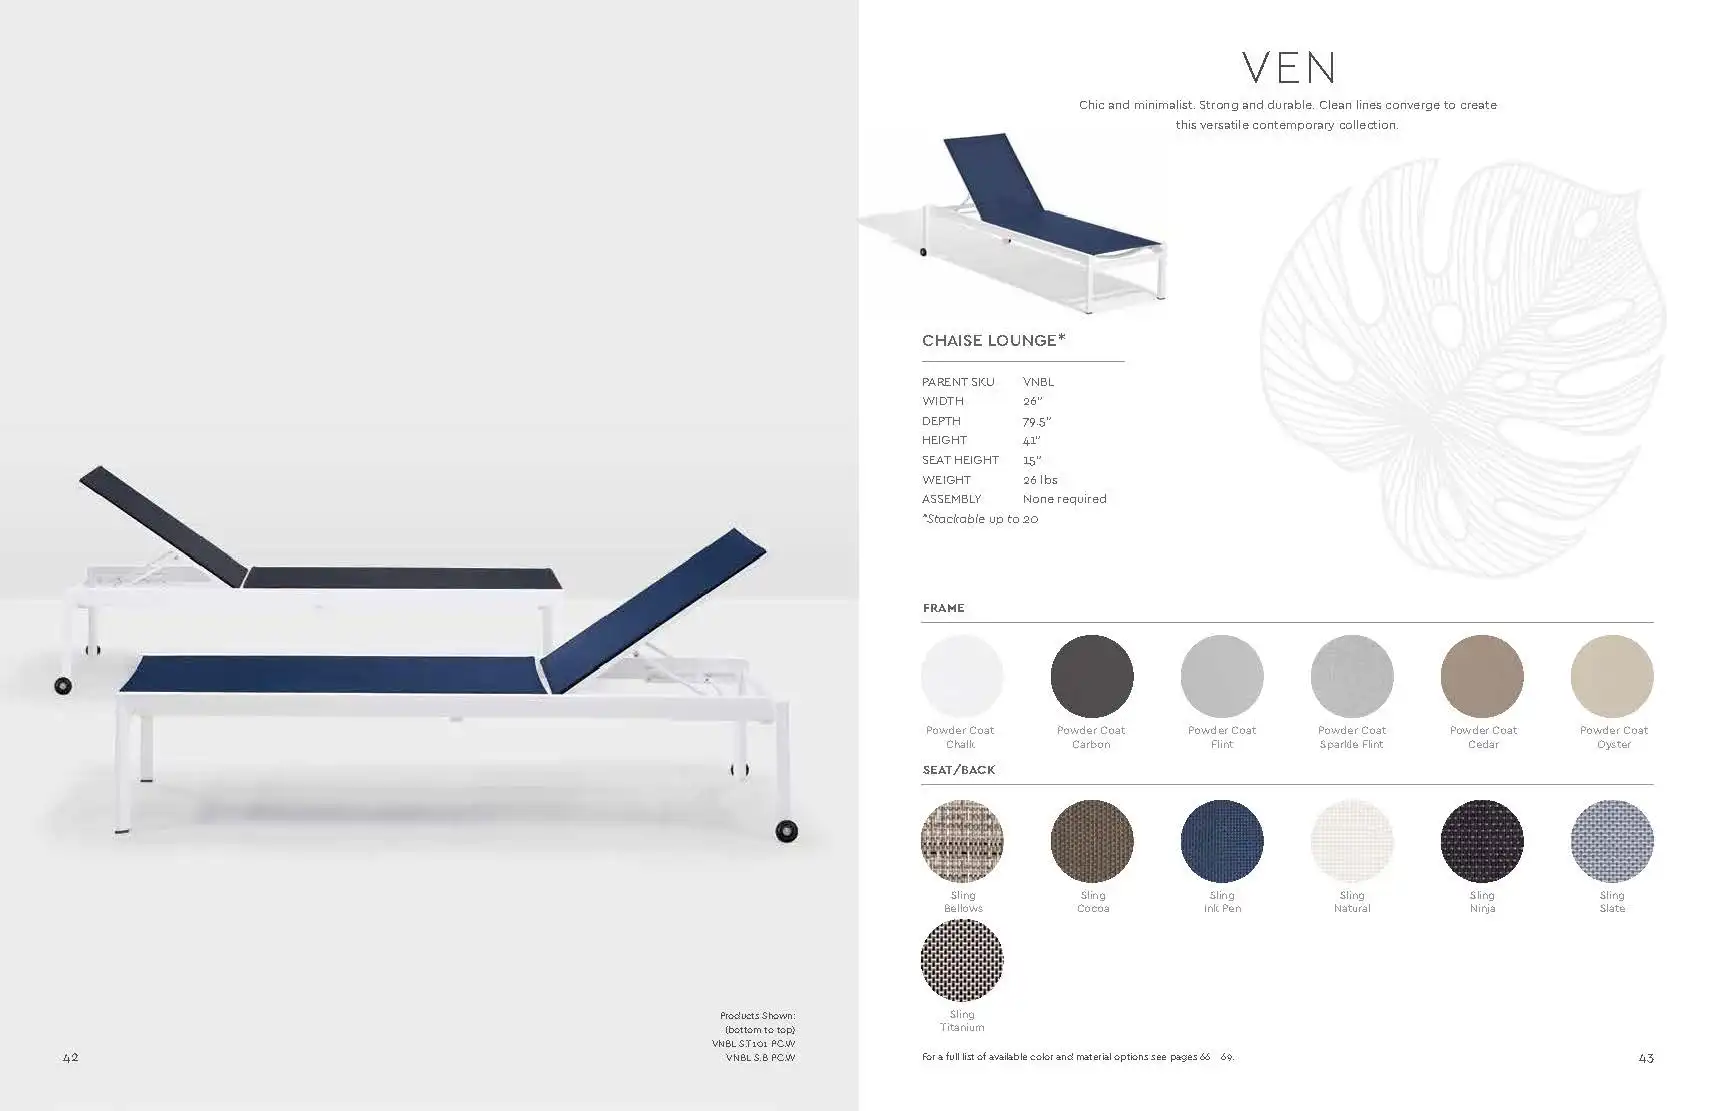 VEN (New for 2021) Lounger Chaises by Oxford Garden